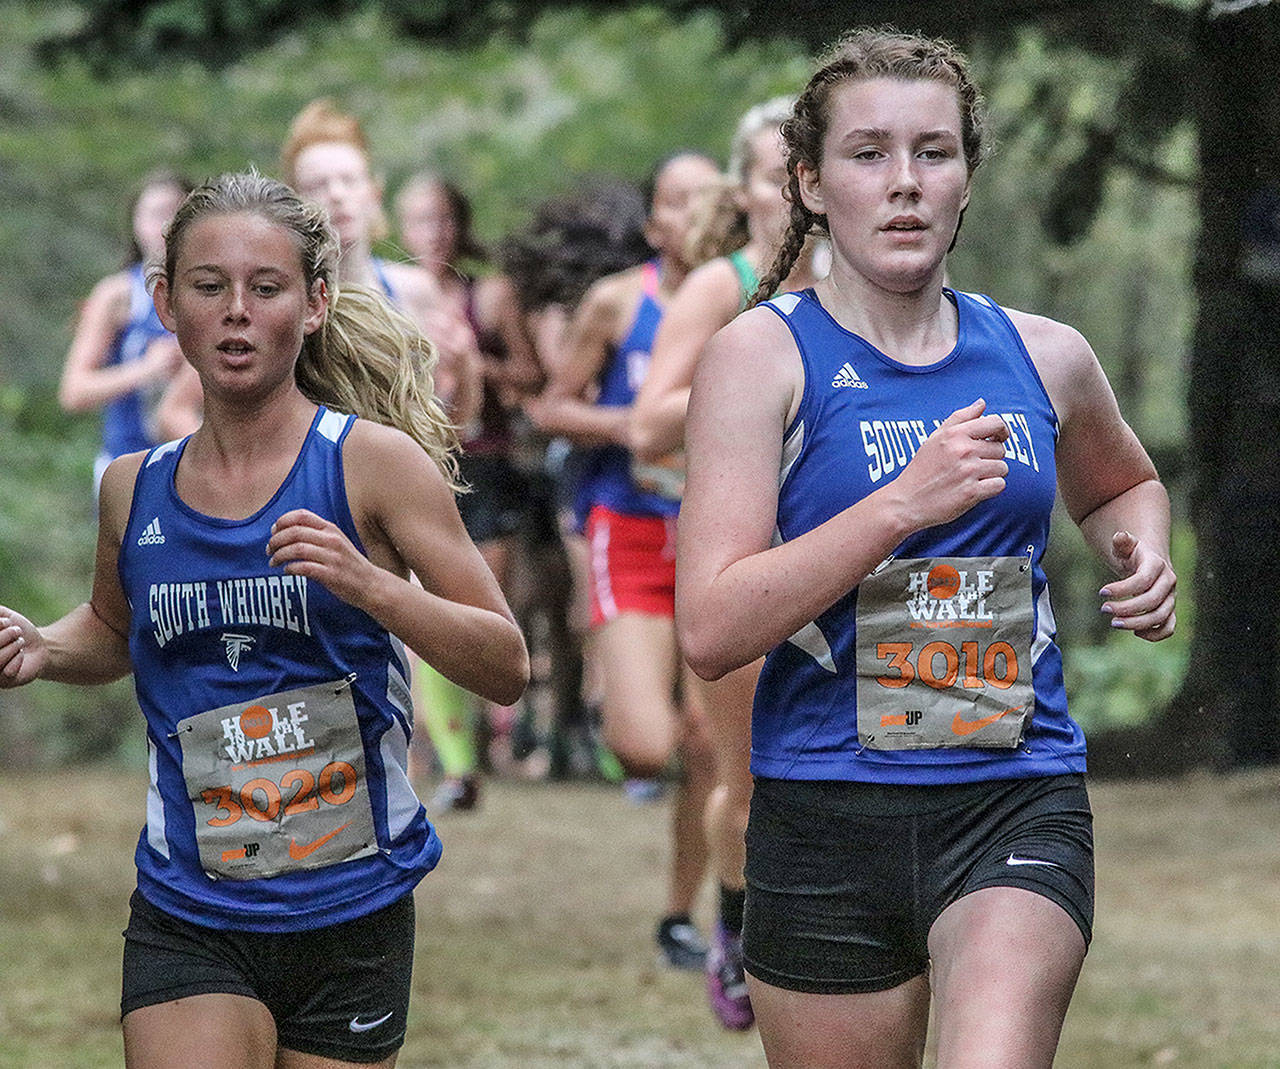 Matt Simms photo — South Whidbey junior Alexandra Kurtz (left) and senior Elizabeth Donnelly (right) finished 24th and 26th, respectively, at the Nike Hole In the Wall XC Invitational on Oct. 7 at Lakewood High School.